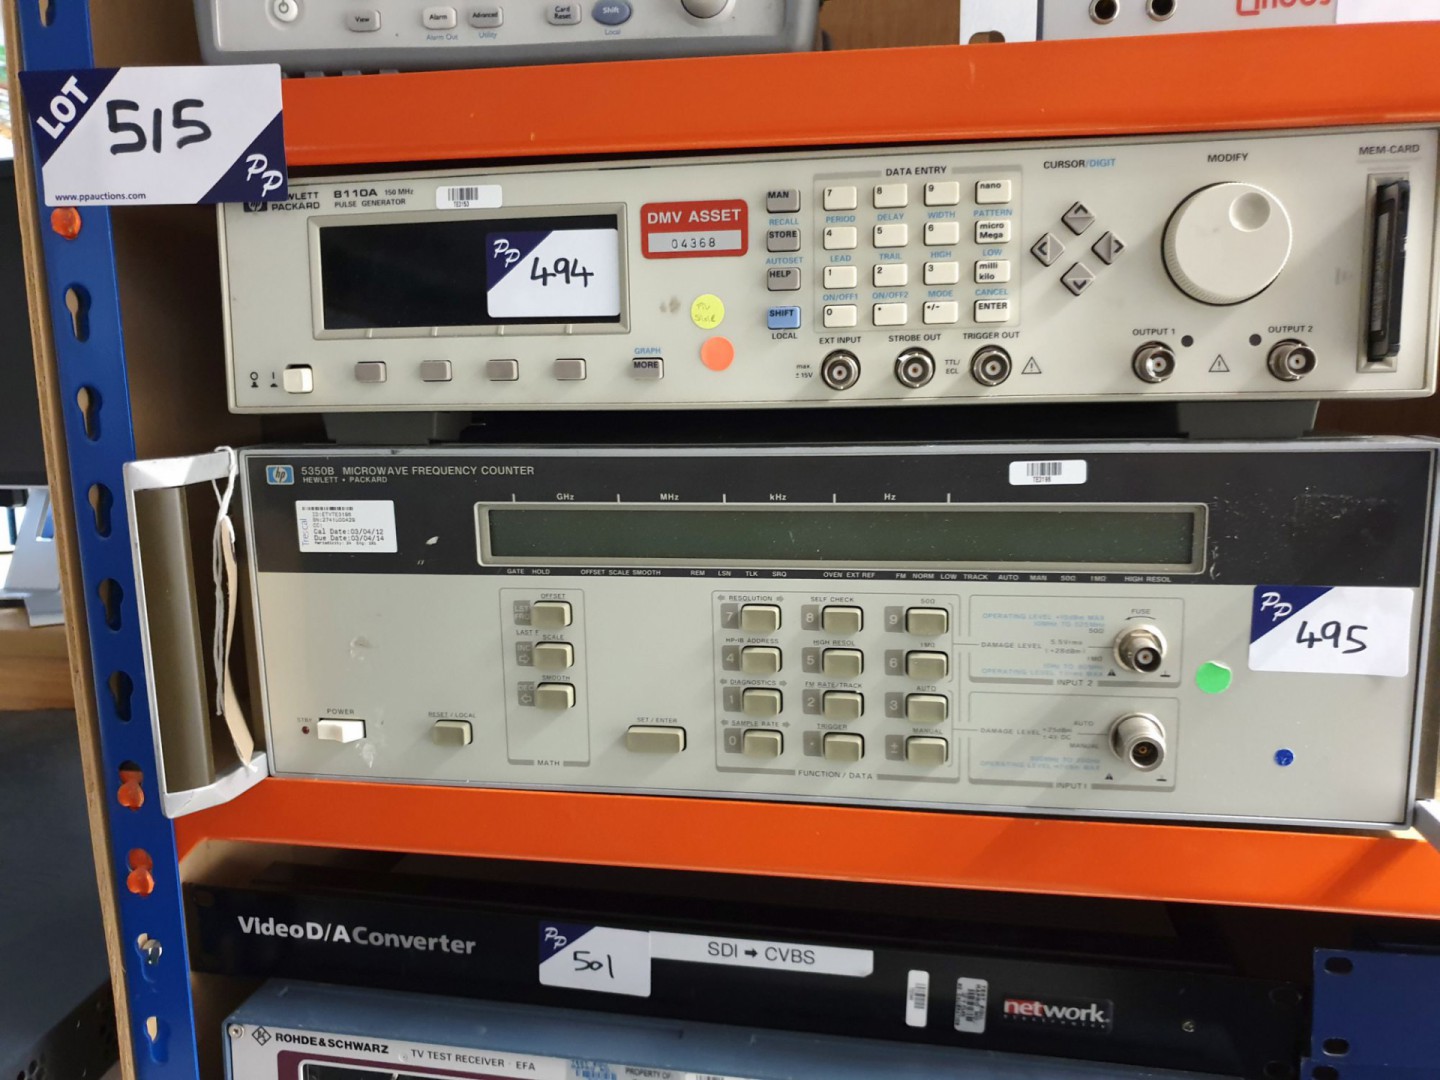 HP 5350B microwave frequency counter